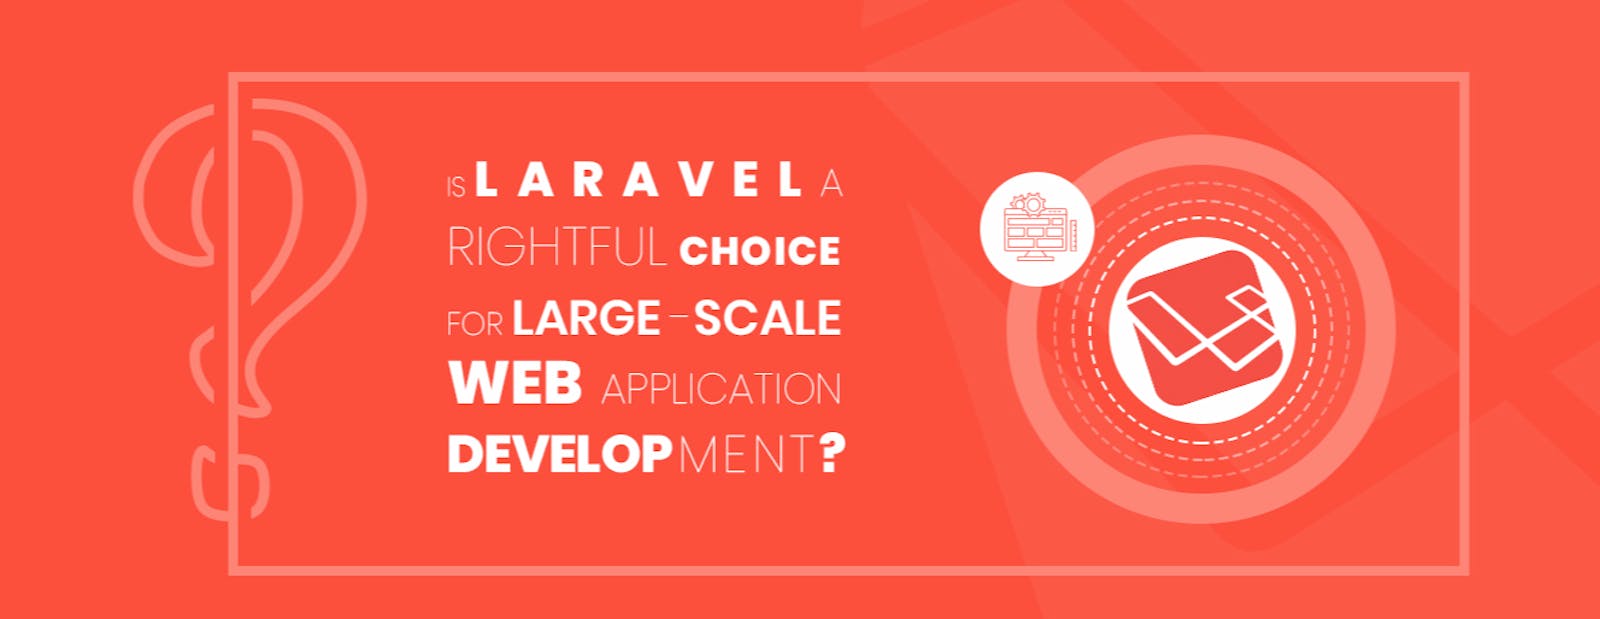 Is Laravel a Rightful Choice For Large-Scale Web Application Development?